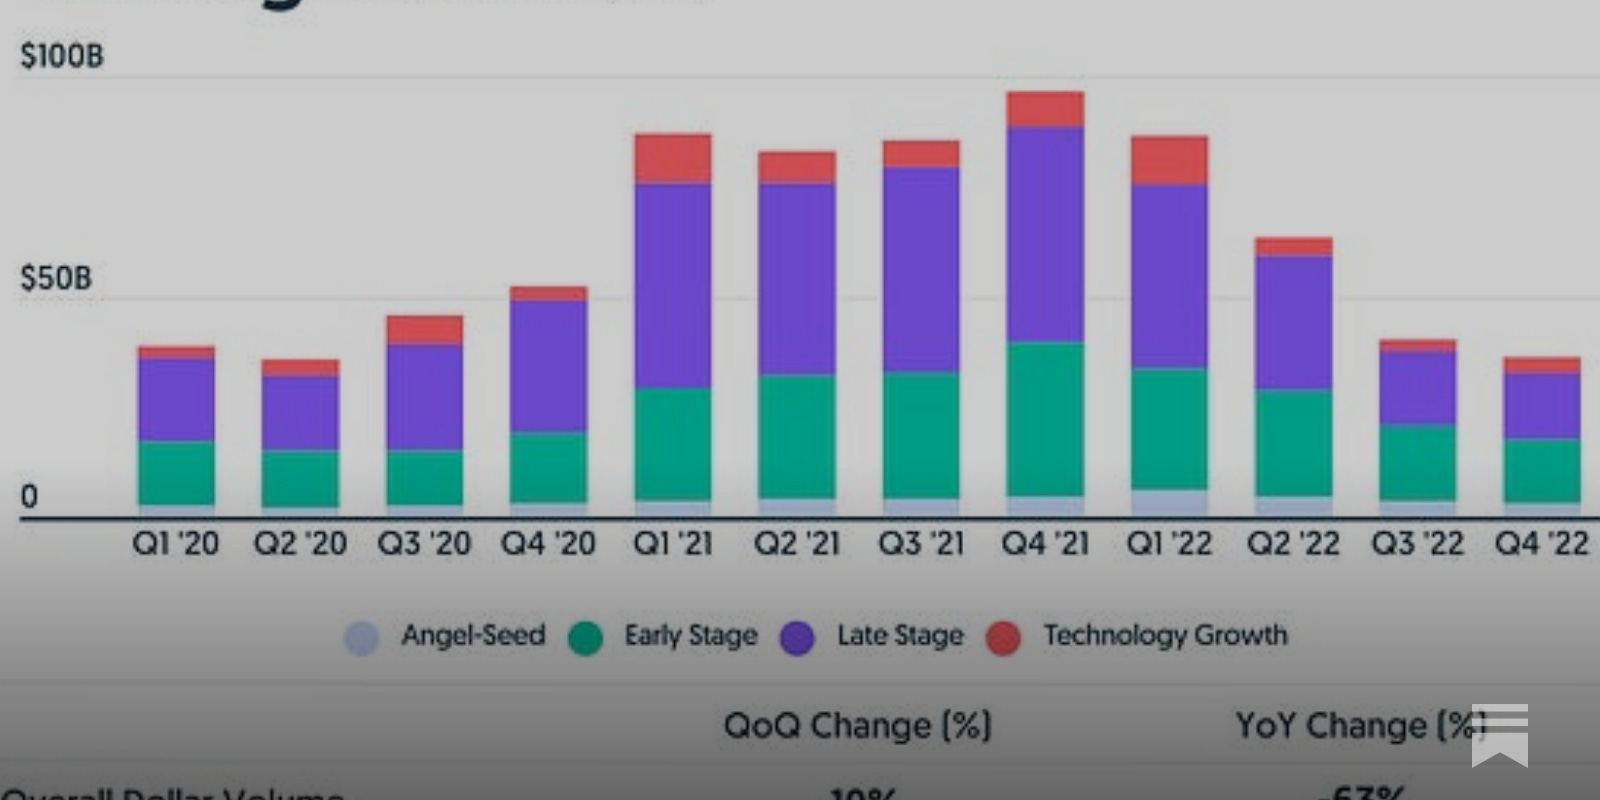 Early-stage Startup Valuations For Q3 of 2023